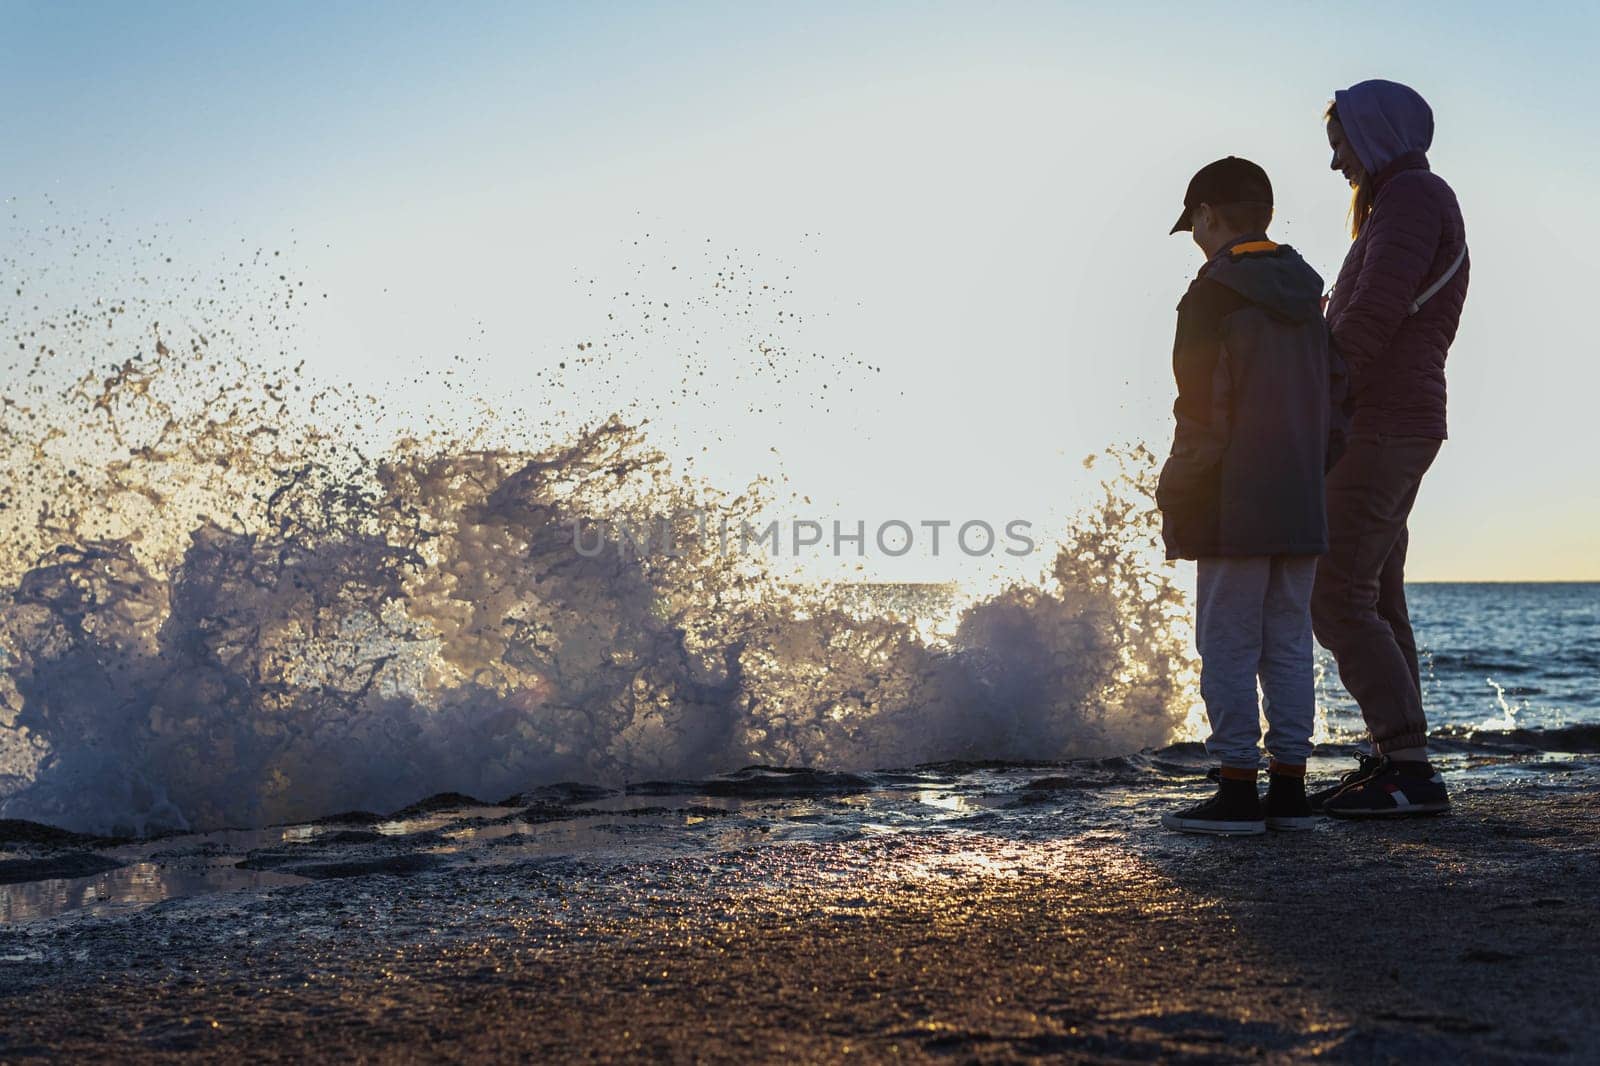 on the seashore, mom and son look at the waves, there is a place for a by PopOff